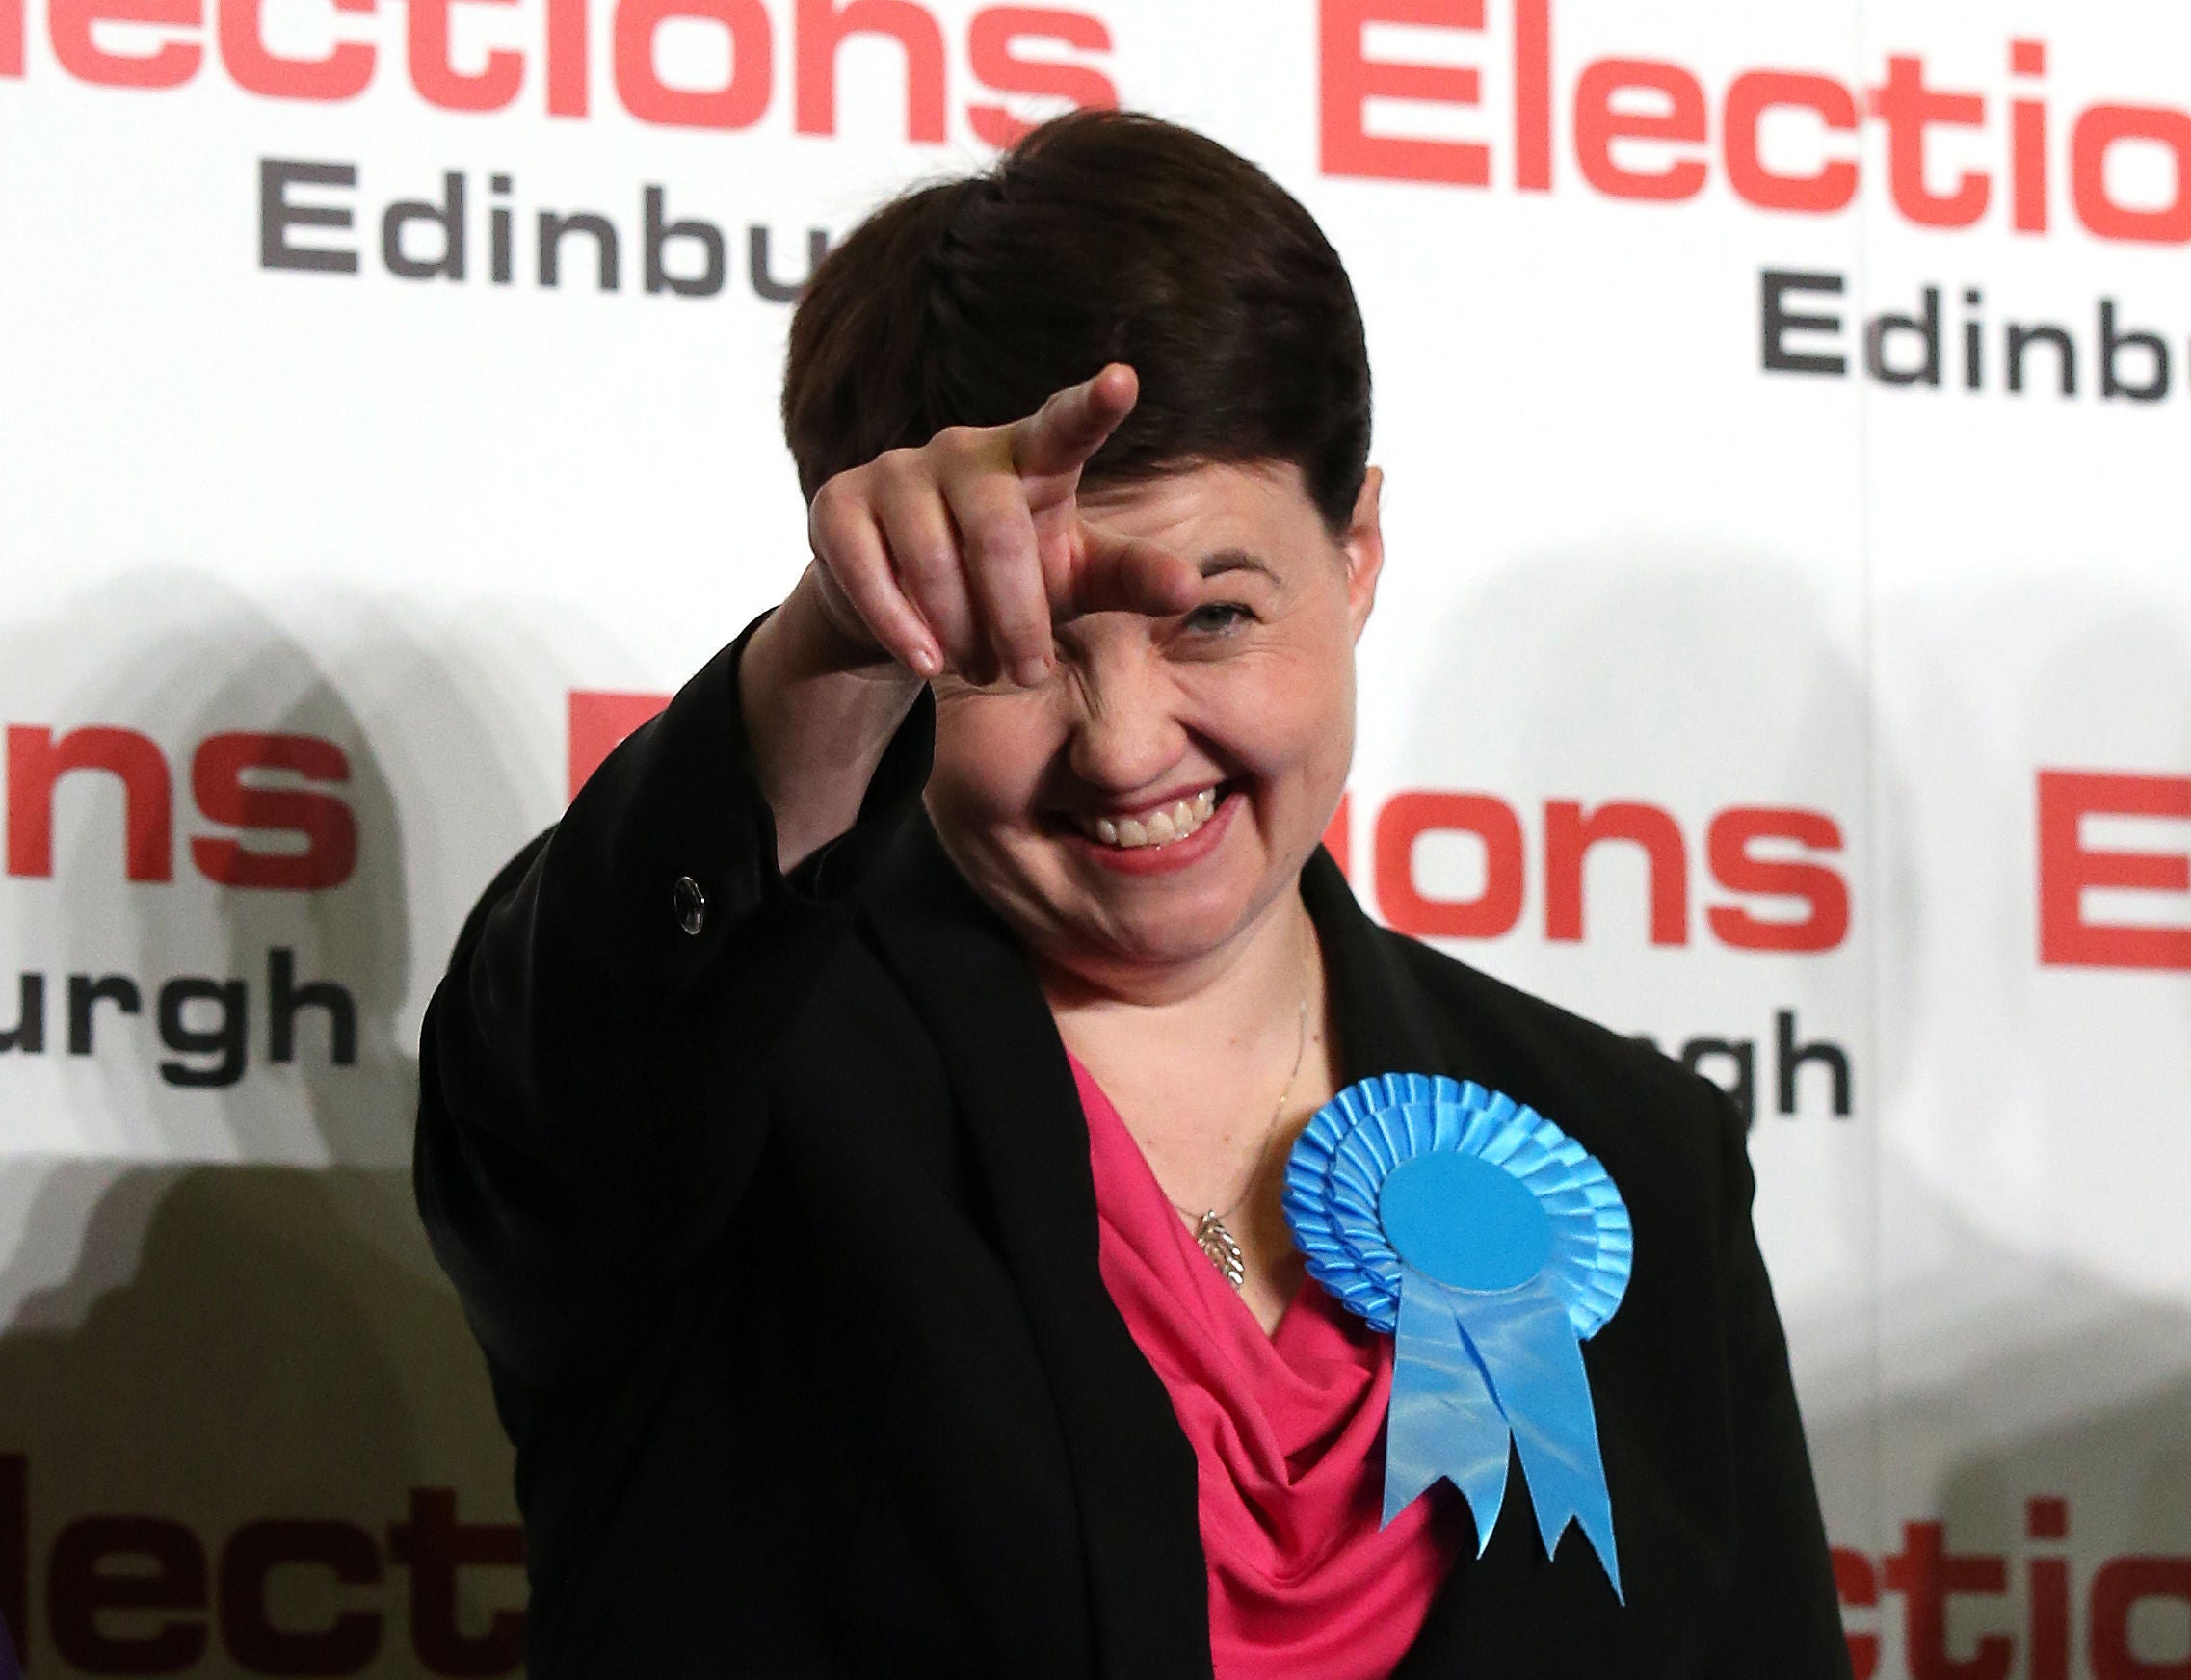 Scottish Conservative leader Ruth Davidson brought the house down with a string of risque jokes at fellow politicians' expense